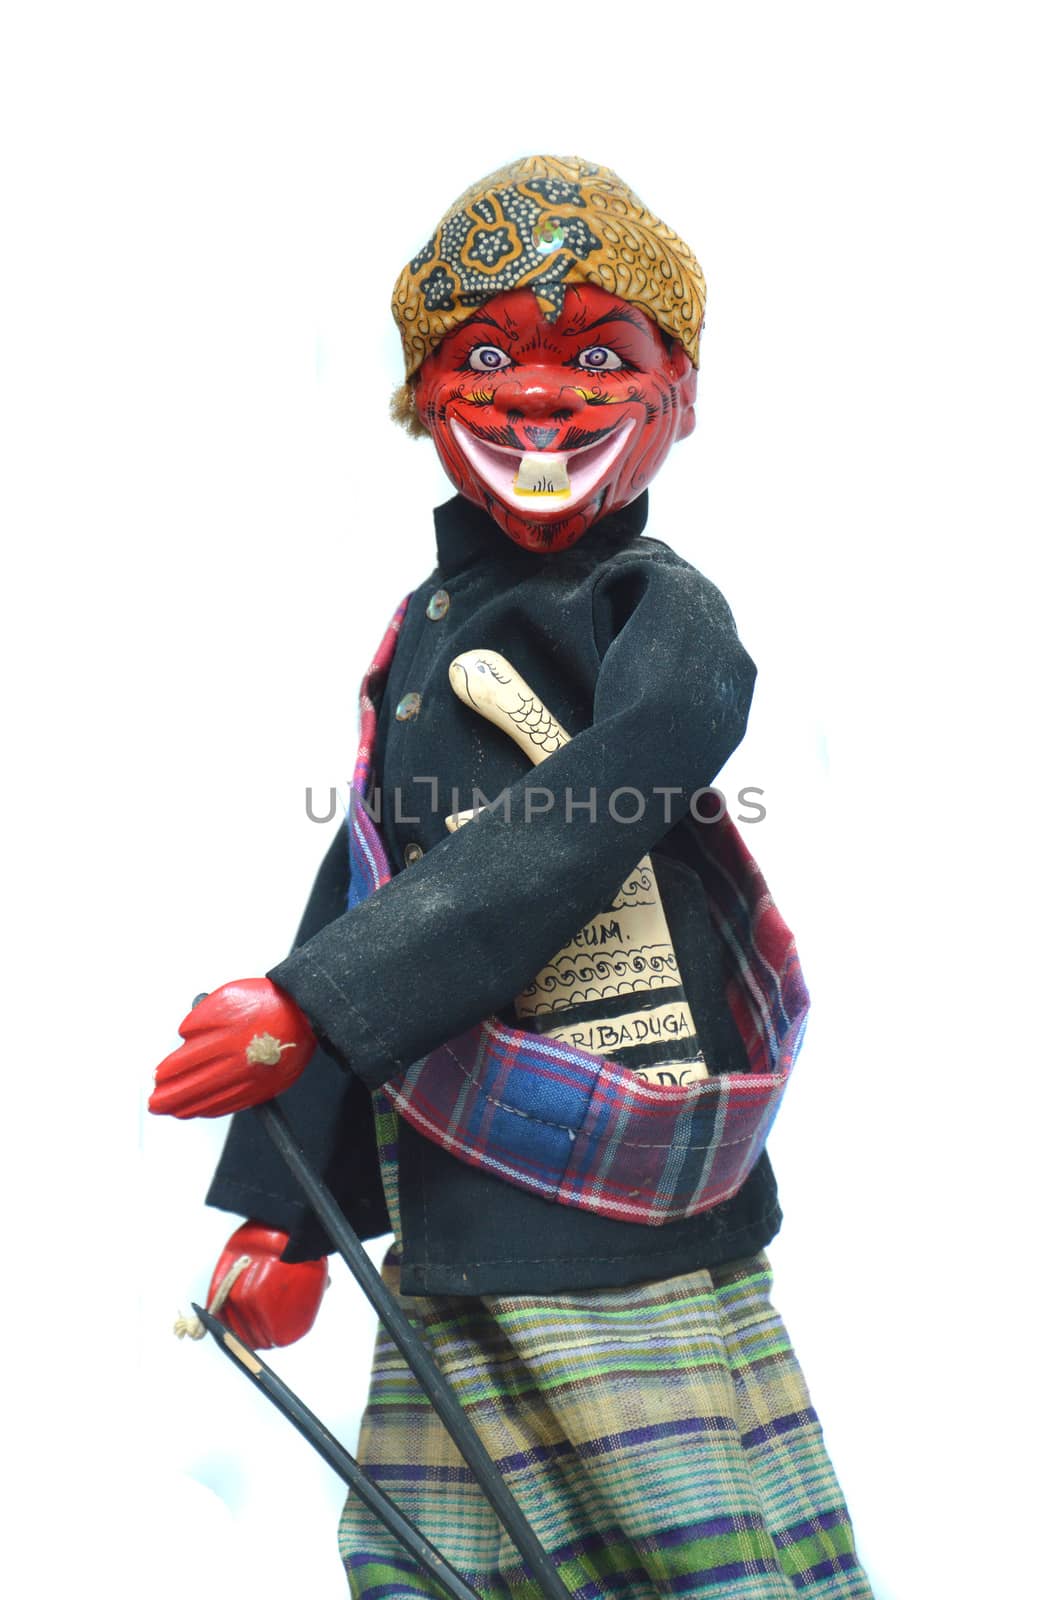 Cepot, traditional puppet doll figure in Indonesia